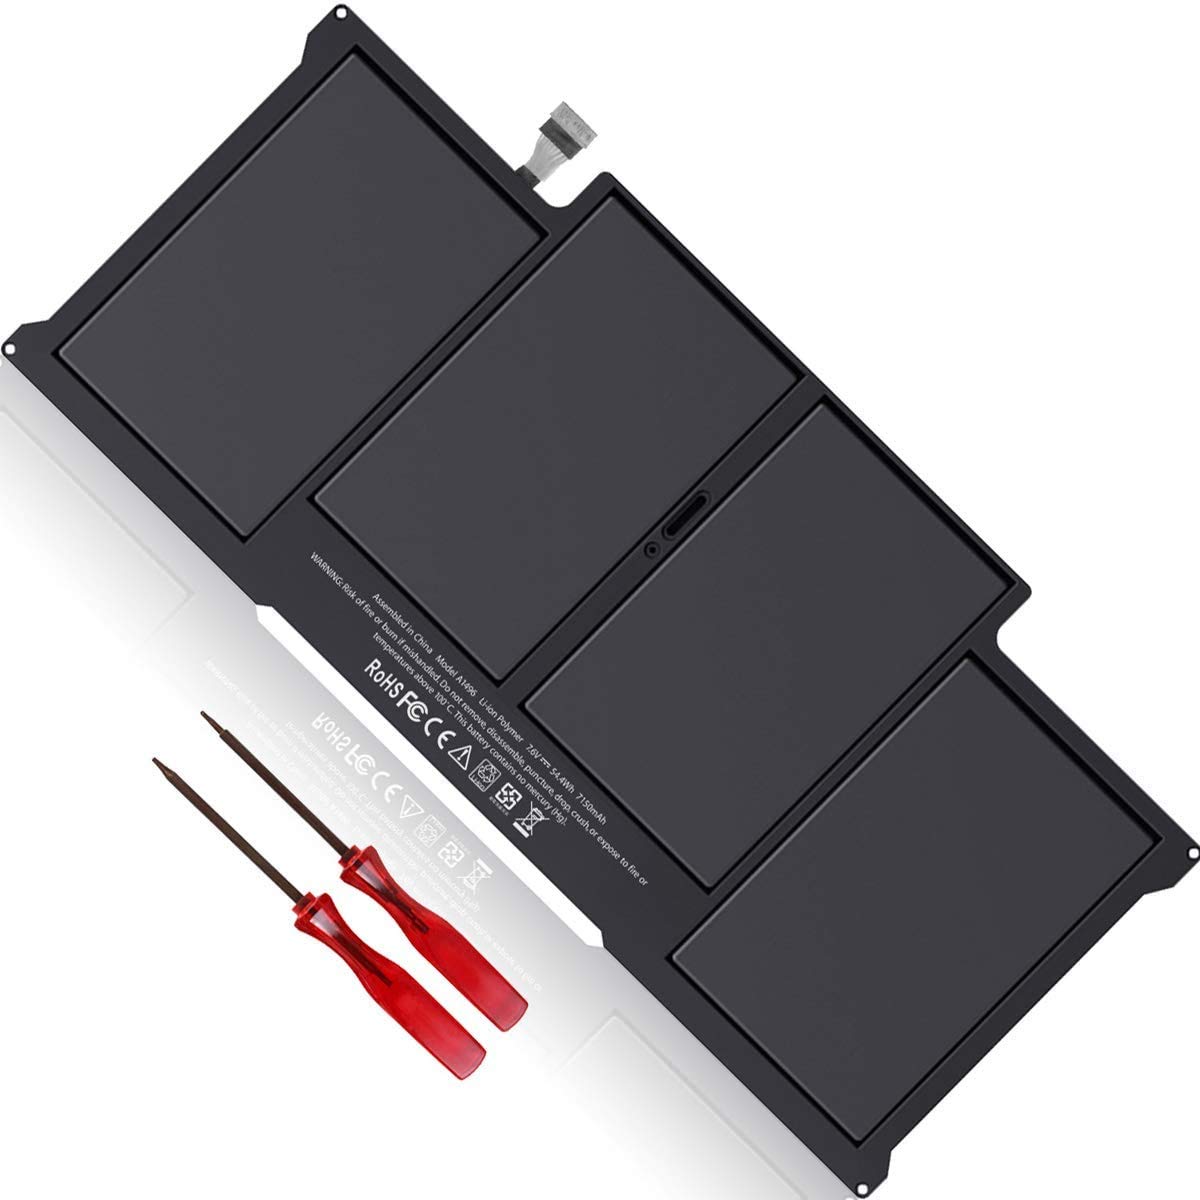 A1496 Laptop Battery Compatible A1496 A1377 A1405 MacBook Air 13 inch A1466 (2017, Early 2015, Early 2014, Mid 2013, Mid 2012, Mid 2011) A1369 (Mid 2011, Late 2010) MC503LL/A MC504LL